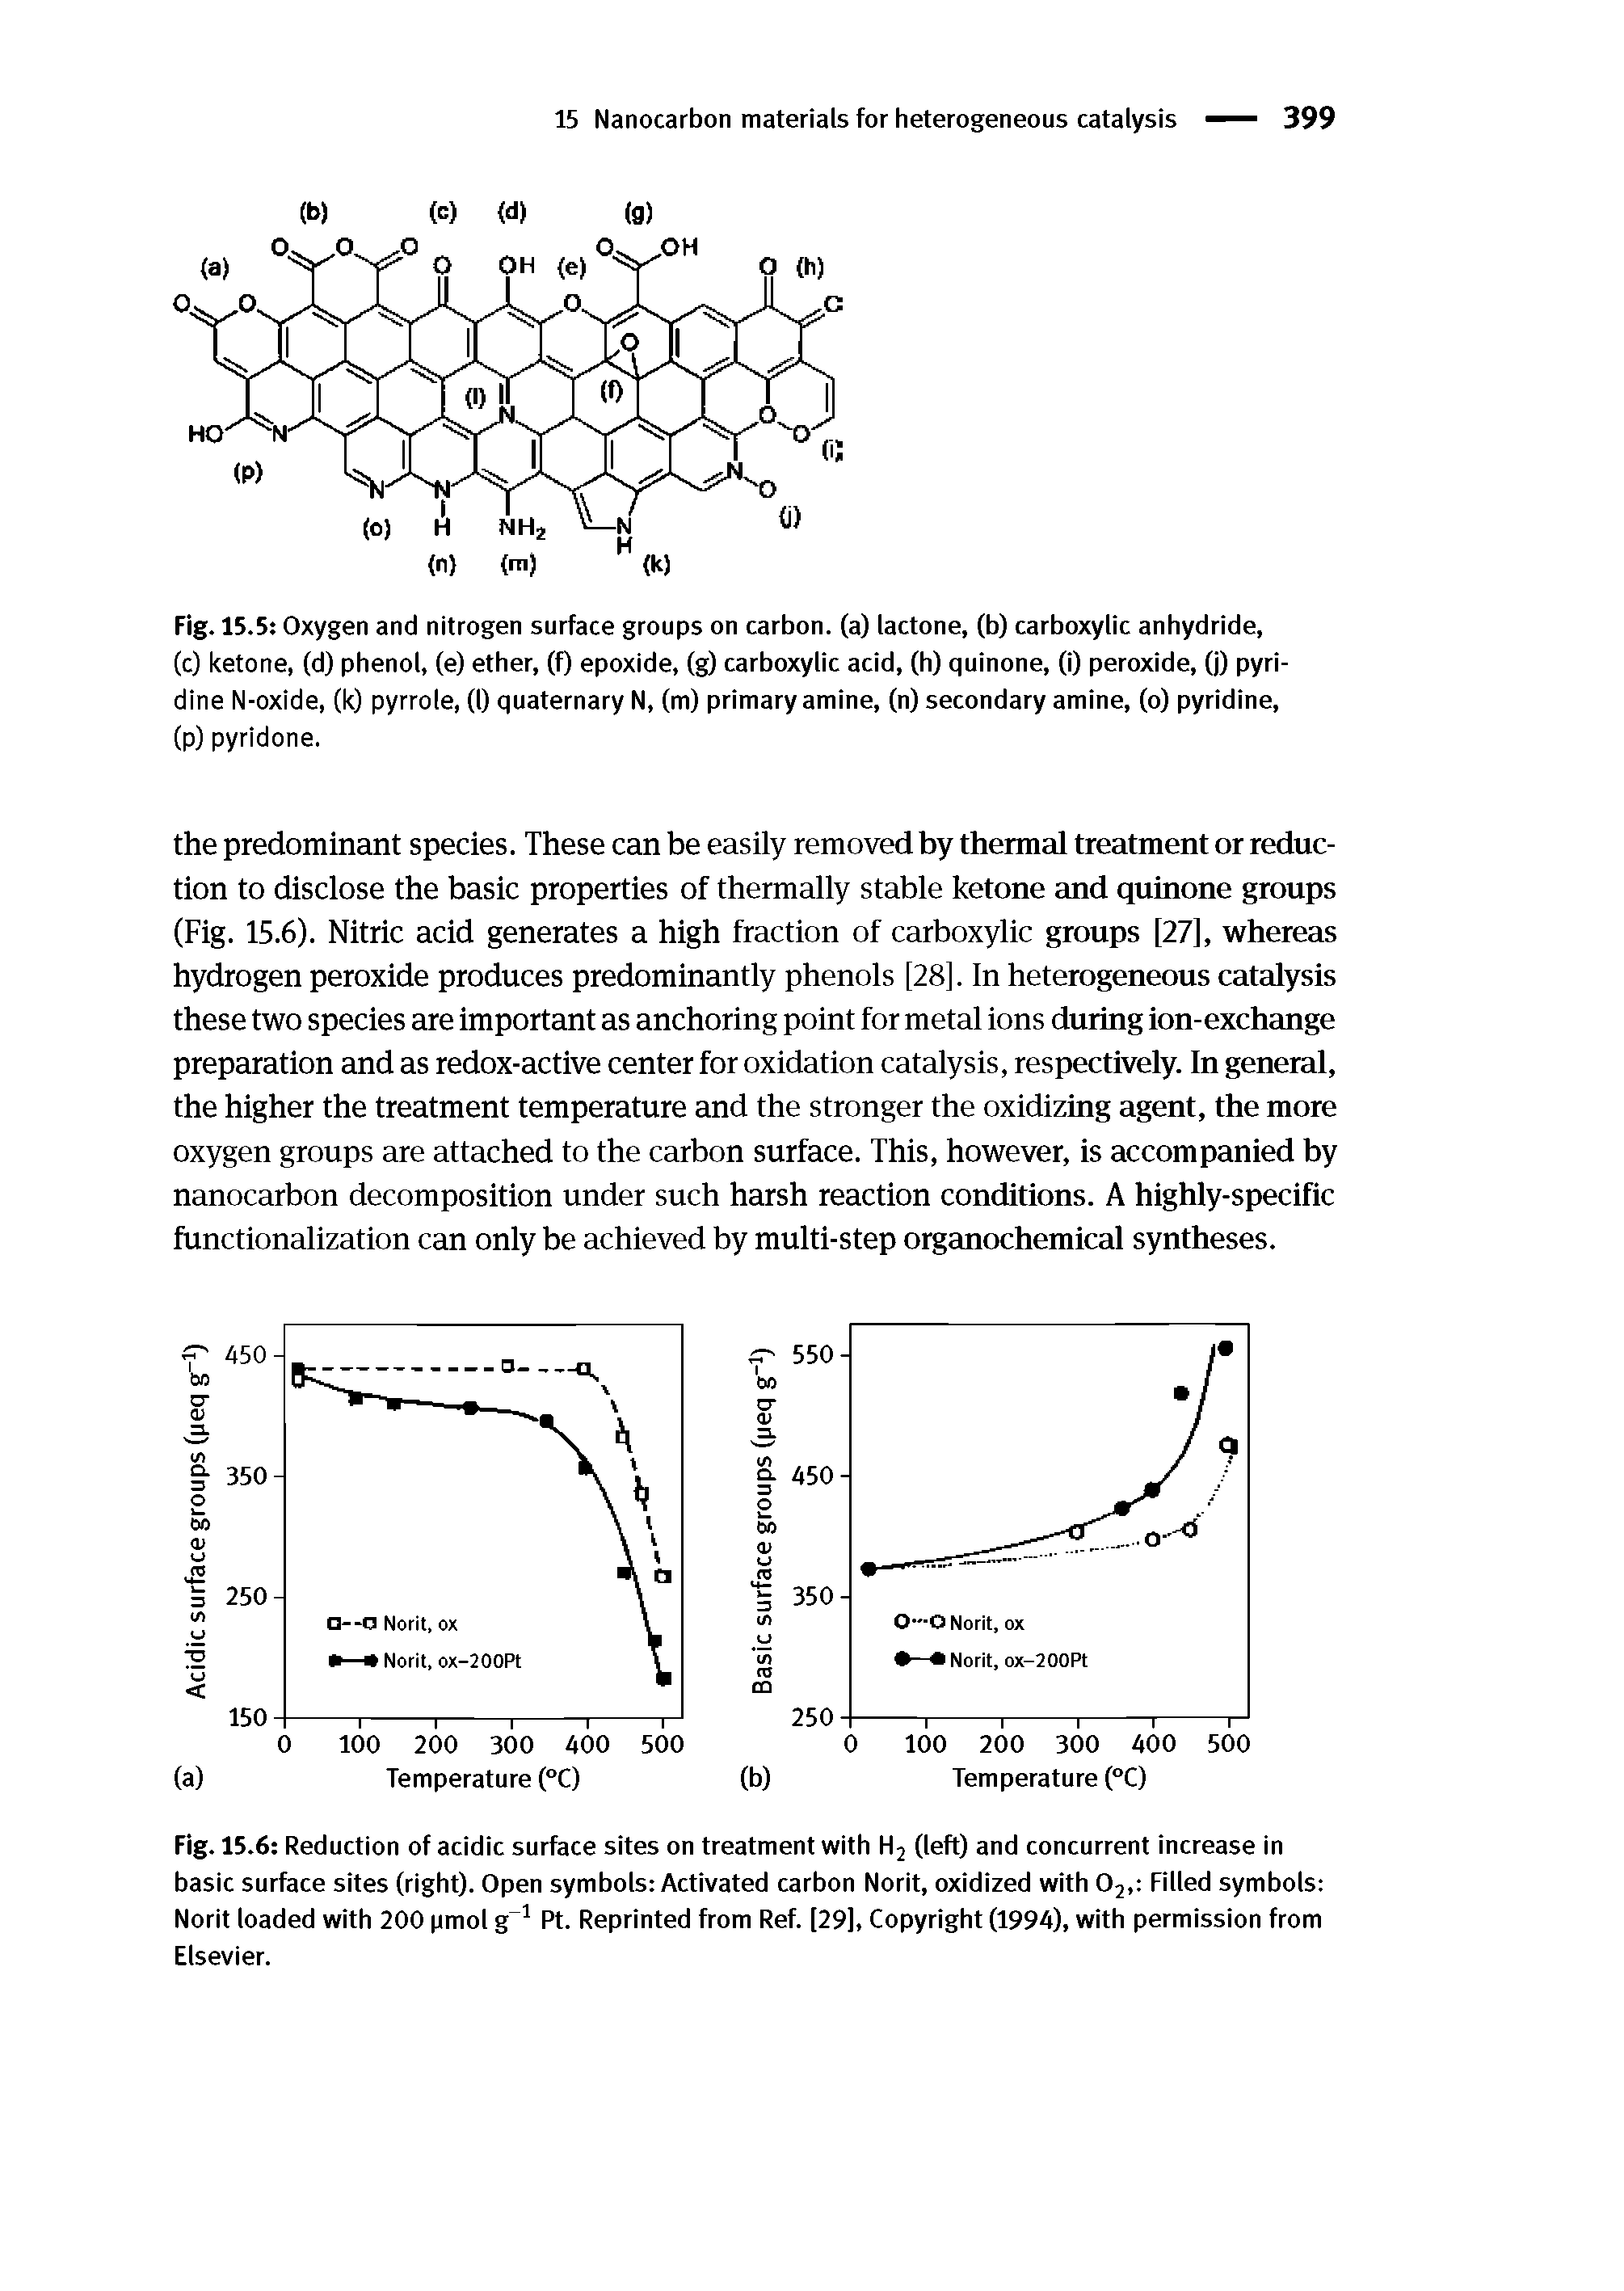 Fig. 15.6 Reduction of acidic surface sites on treatment with H2 (left) and concurrent increase in basic surface sites (right). Open symbols Activated carbon Norit, oxidized with 02, Filled symbols Norit loaded with 200 pmol g 1 Pt. Reprinted from Ref. [29], Copyright (1994), with permission from Elsevier.